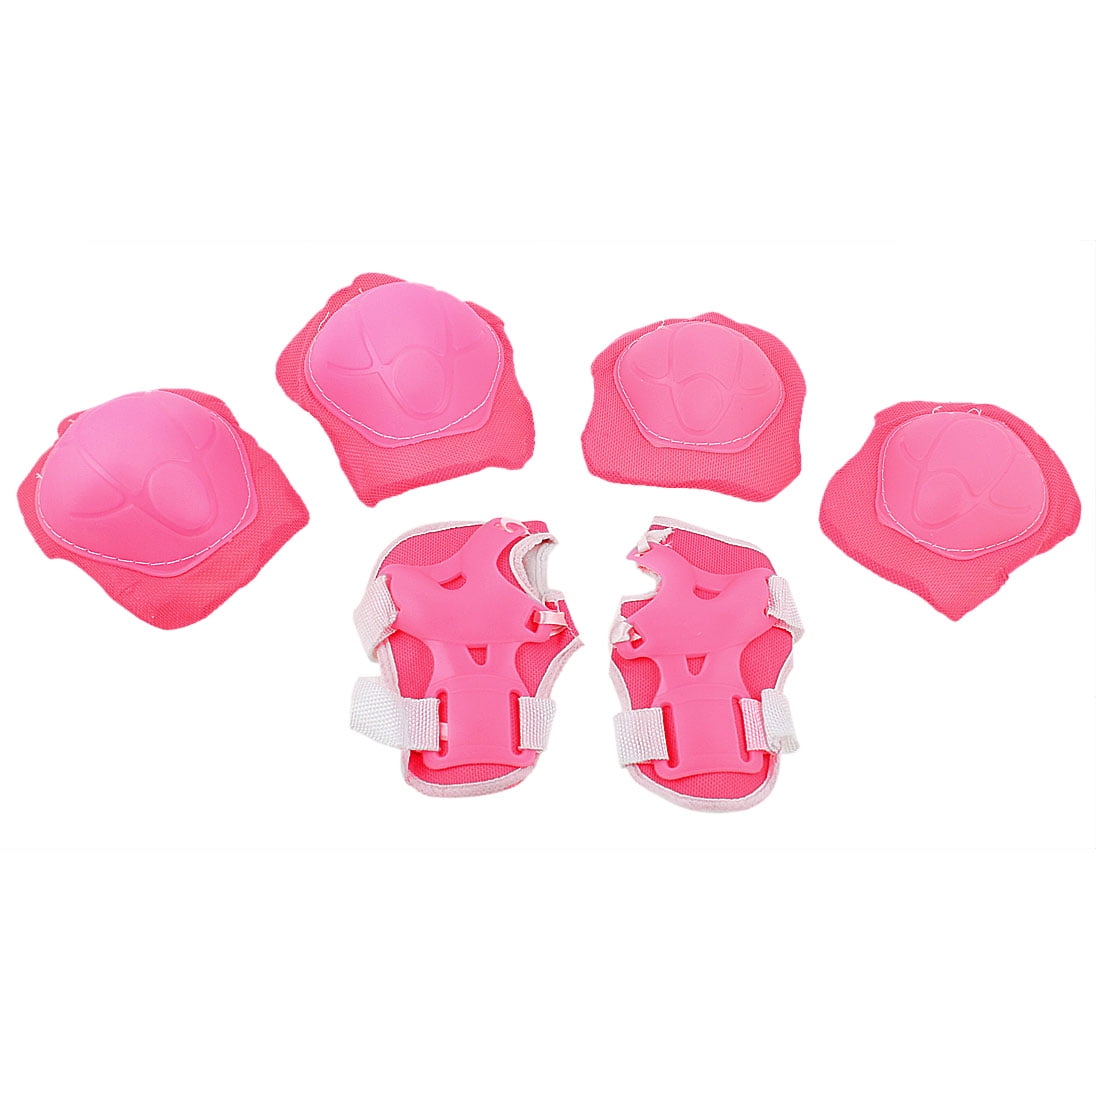 SMALL Stateside Girls Hot Pink Protective 3 Pack AC760P 